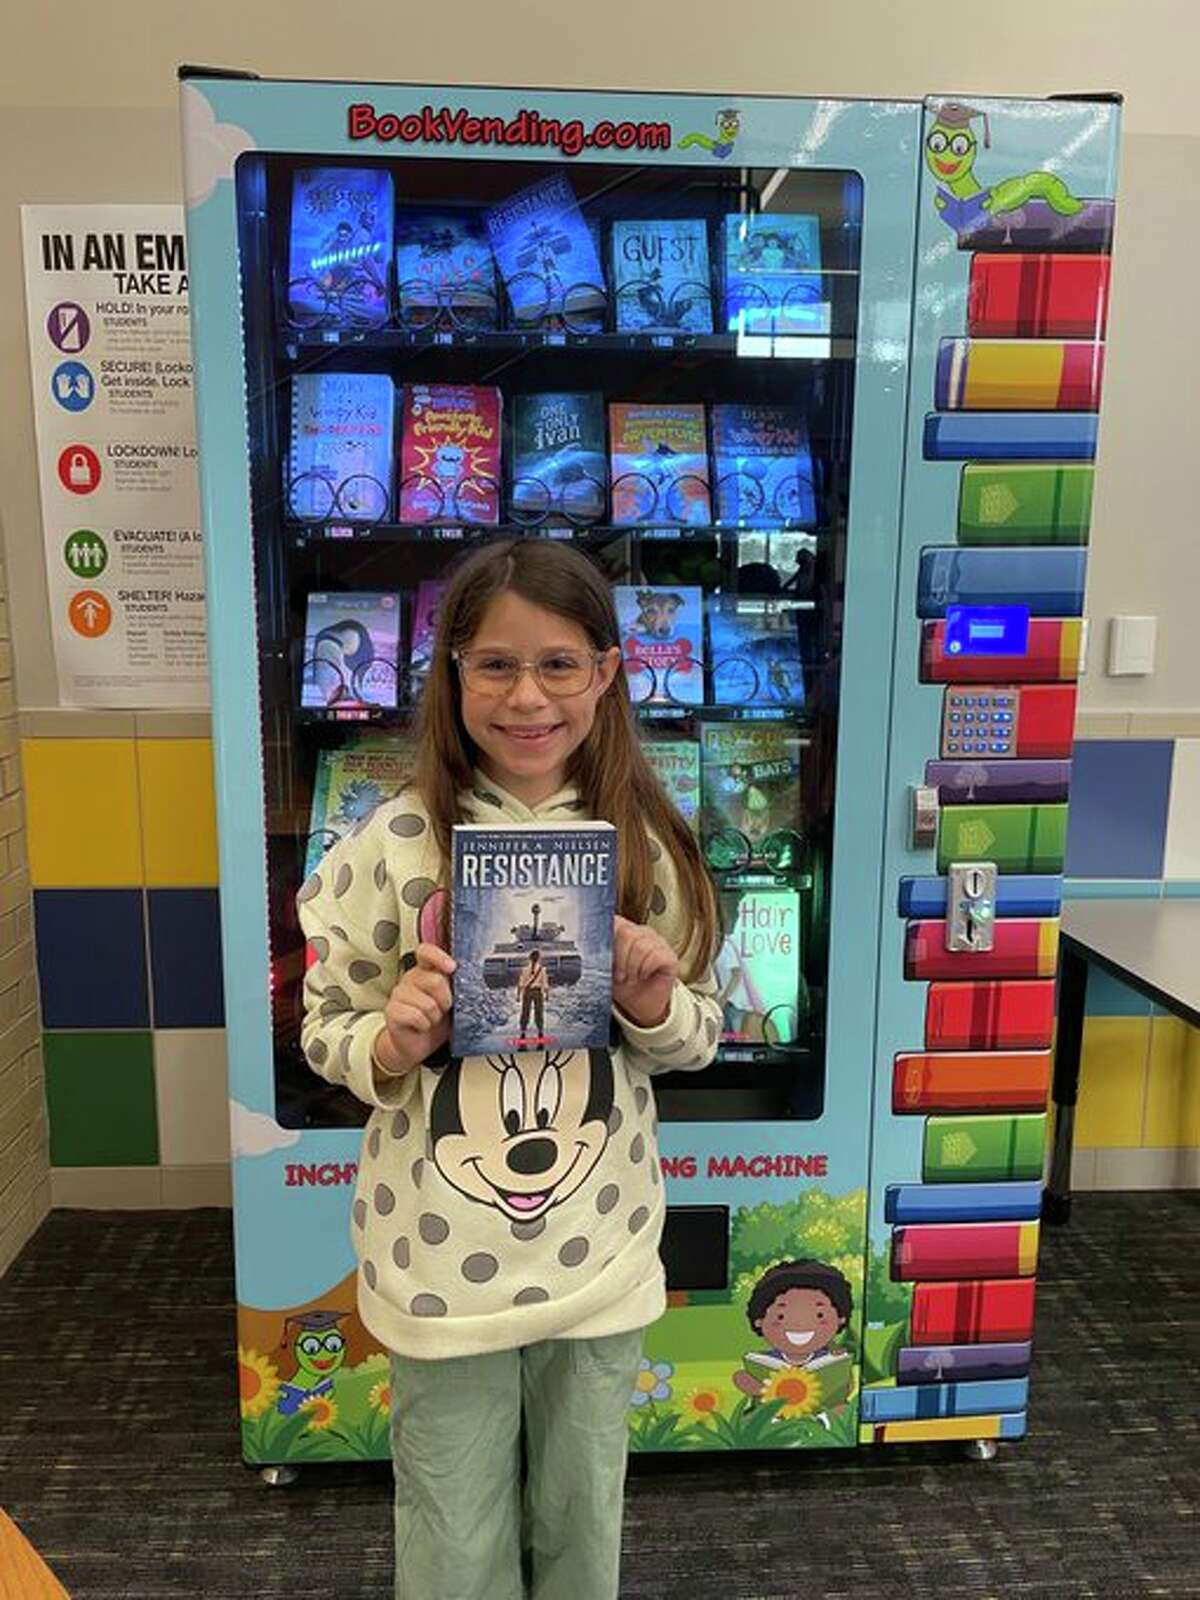 Nelson Elementary School fourth-grader Claire Knape used a token she received as a reward for taking her friend to the school nurse to get a book from the school's book-vending machine.